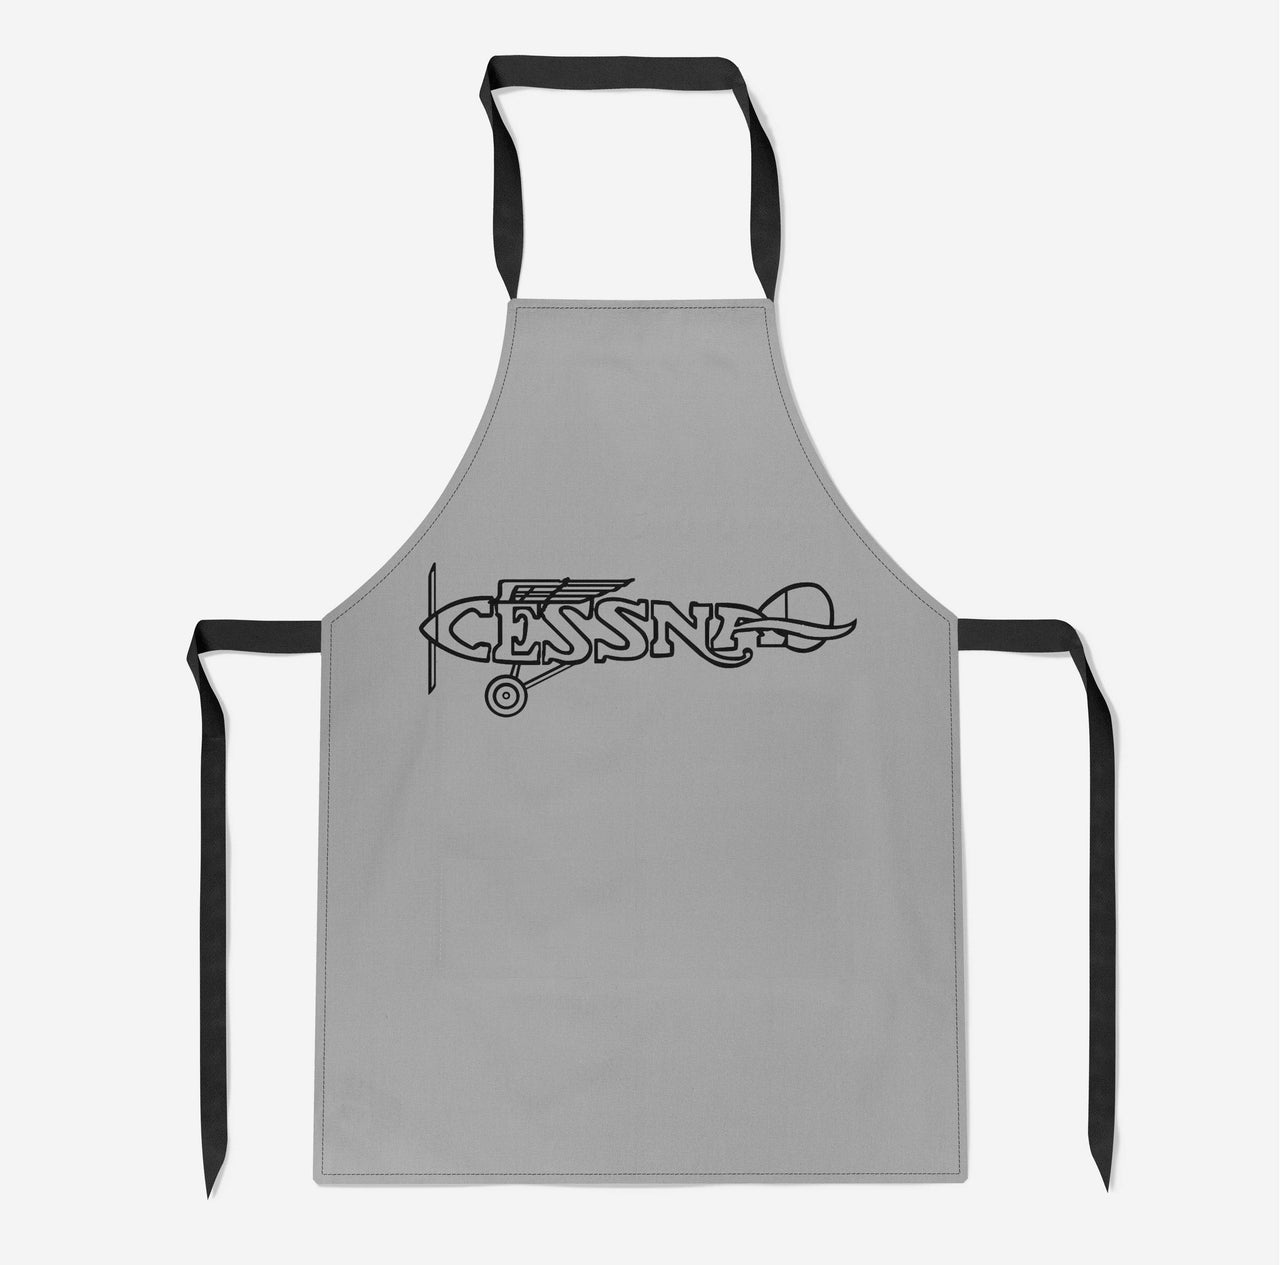 Special Cessna Text Designed Kitchen Aprons